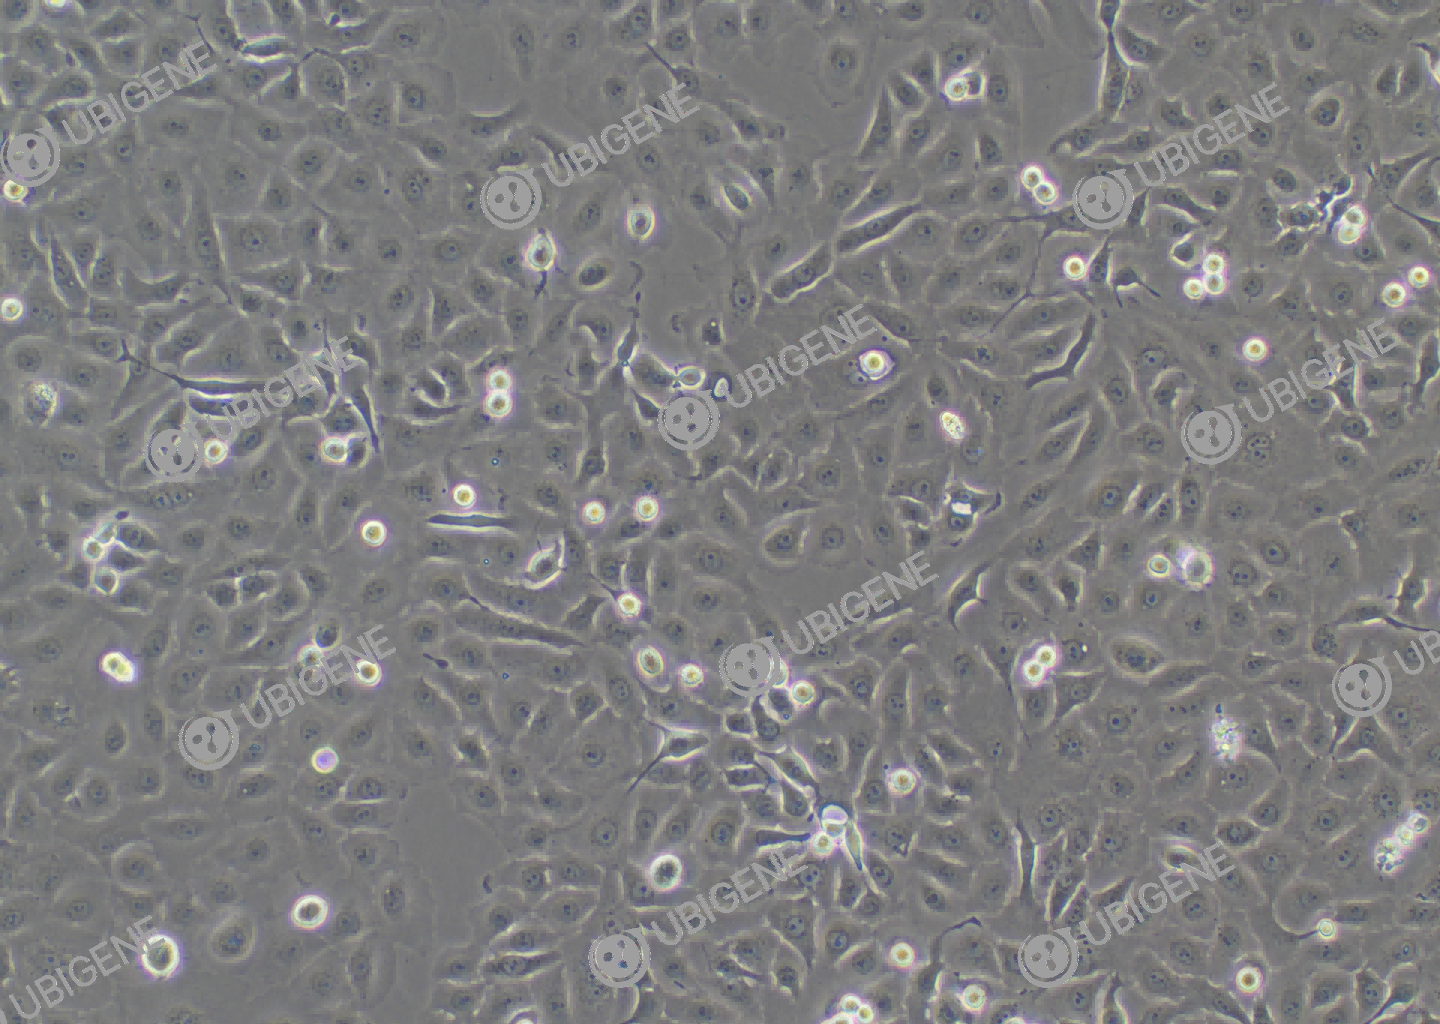 NCI-H1650 cell line Cultured cell morphology